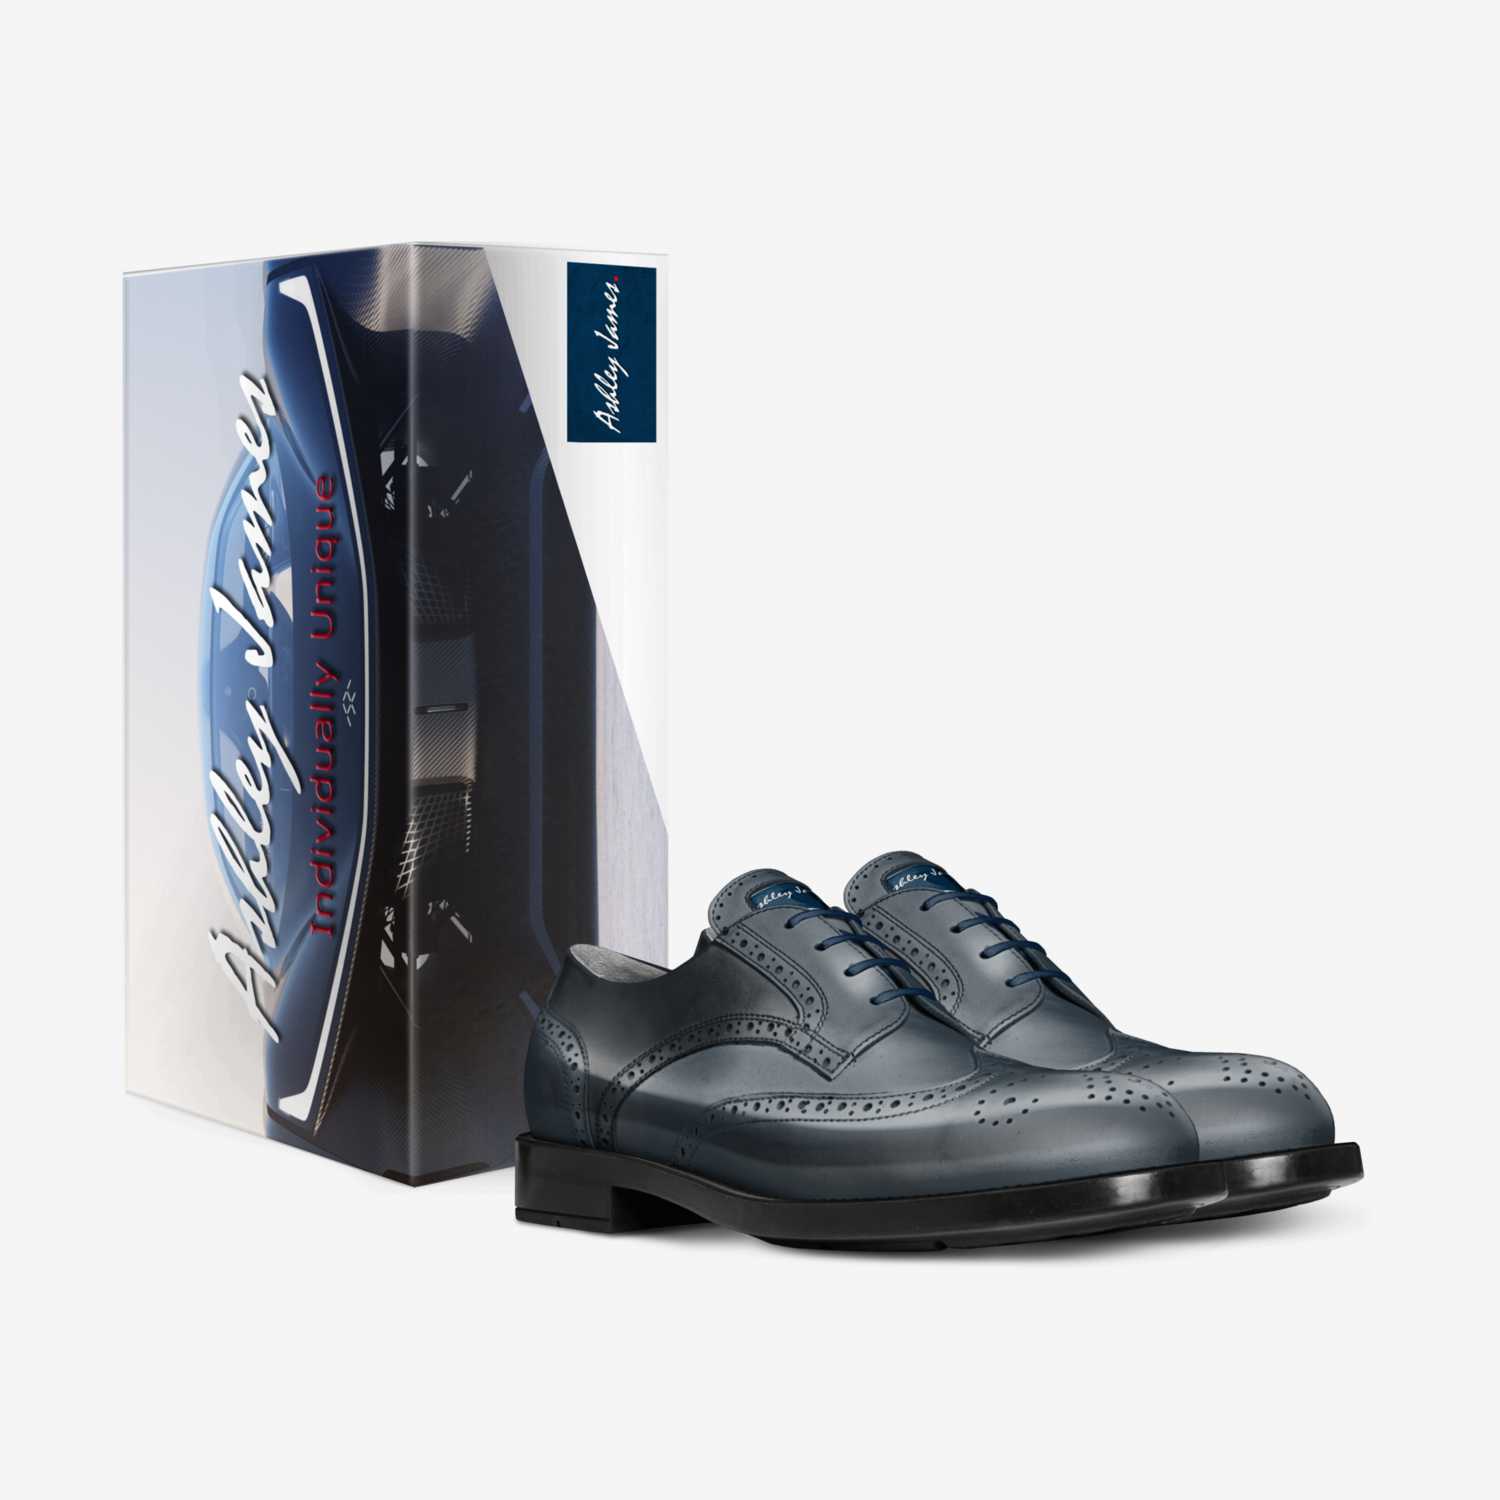 Deep Blues custom made in Italy shoes by Ashley James | Box view